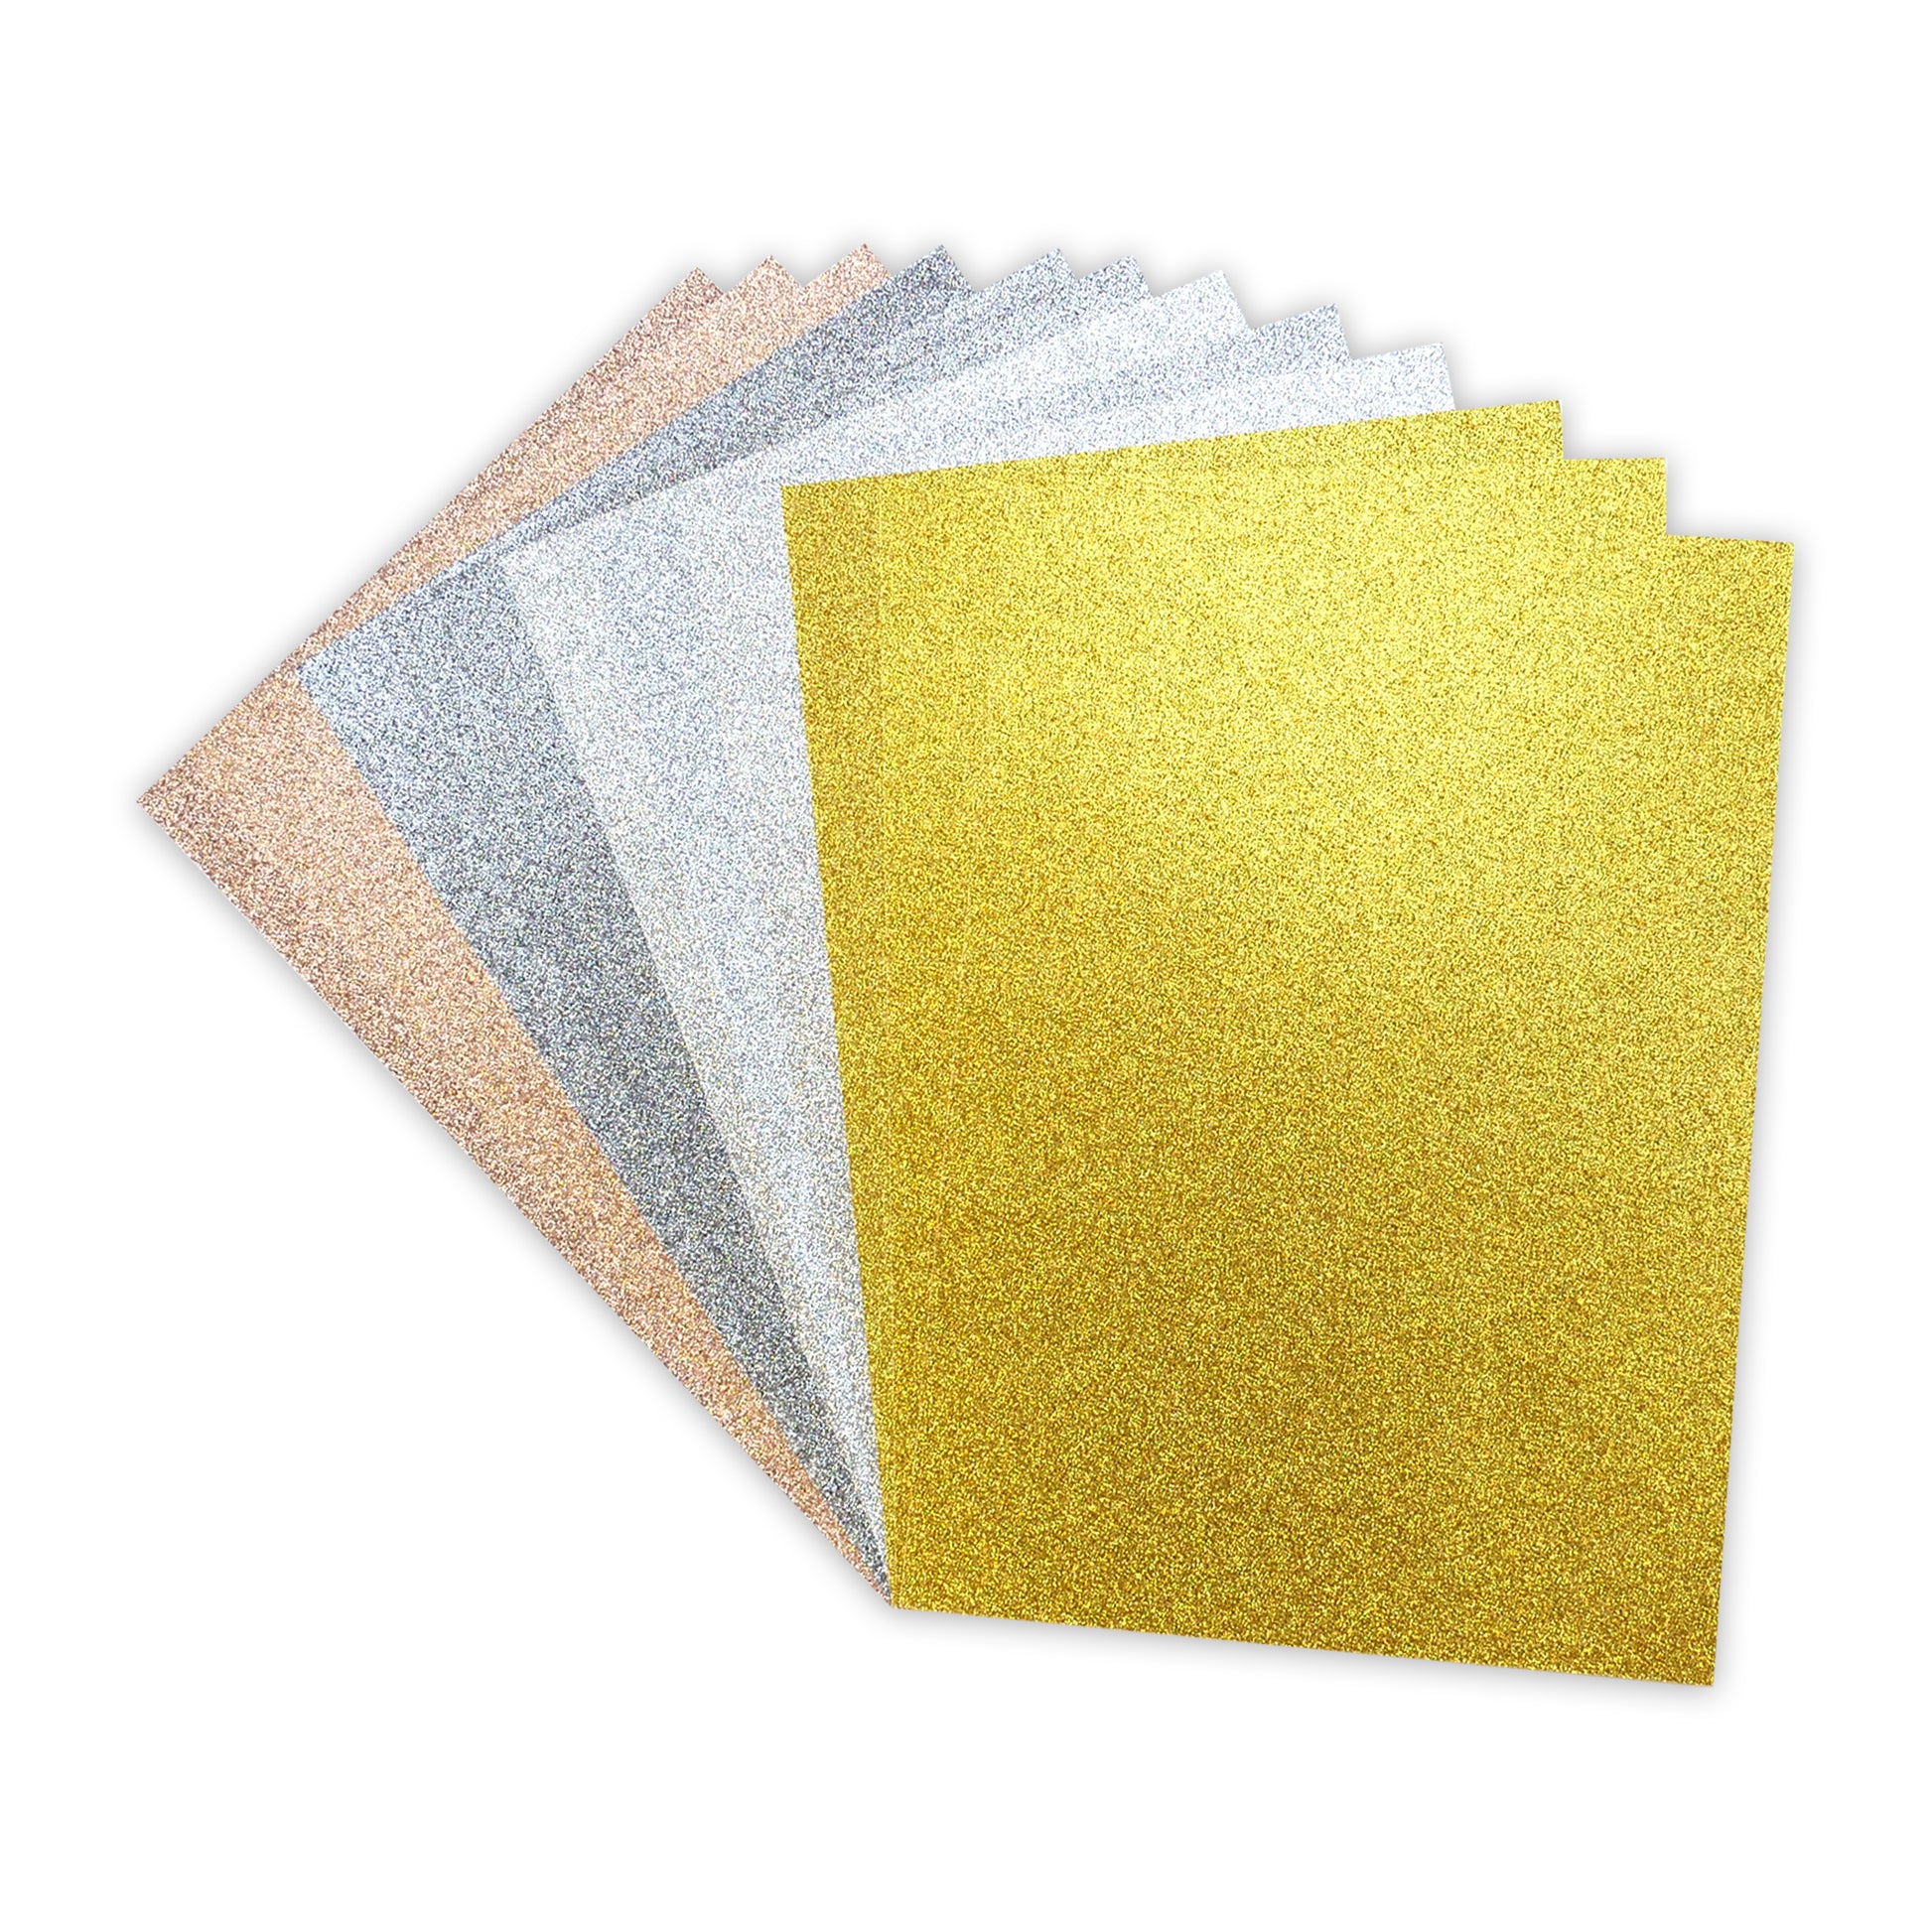 A4 Double Sided Glitter Card - Metallics Rose Gold Silver Gunmetal Gold  - 350gsm 12 Sheets - SweetpeaStore